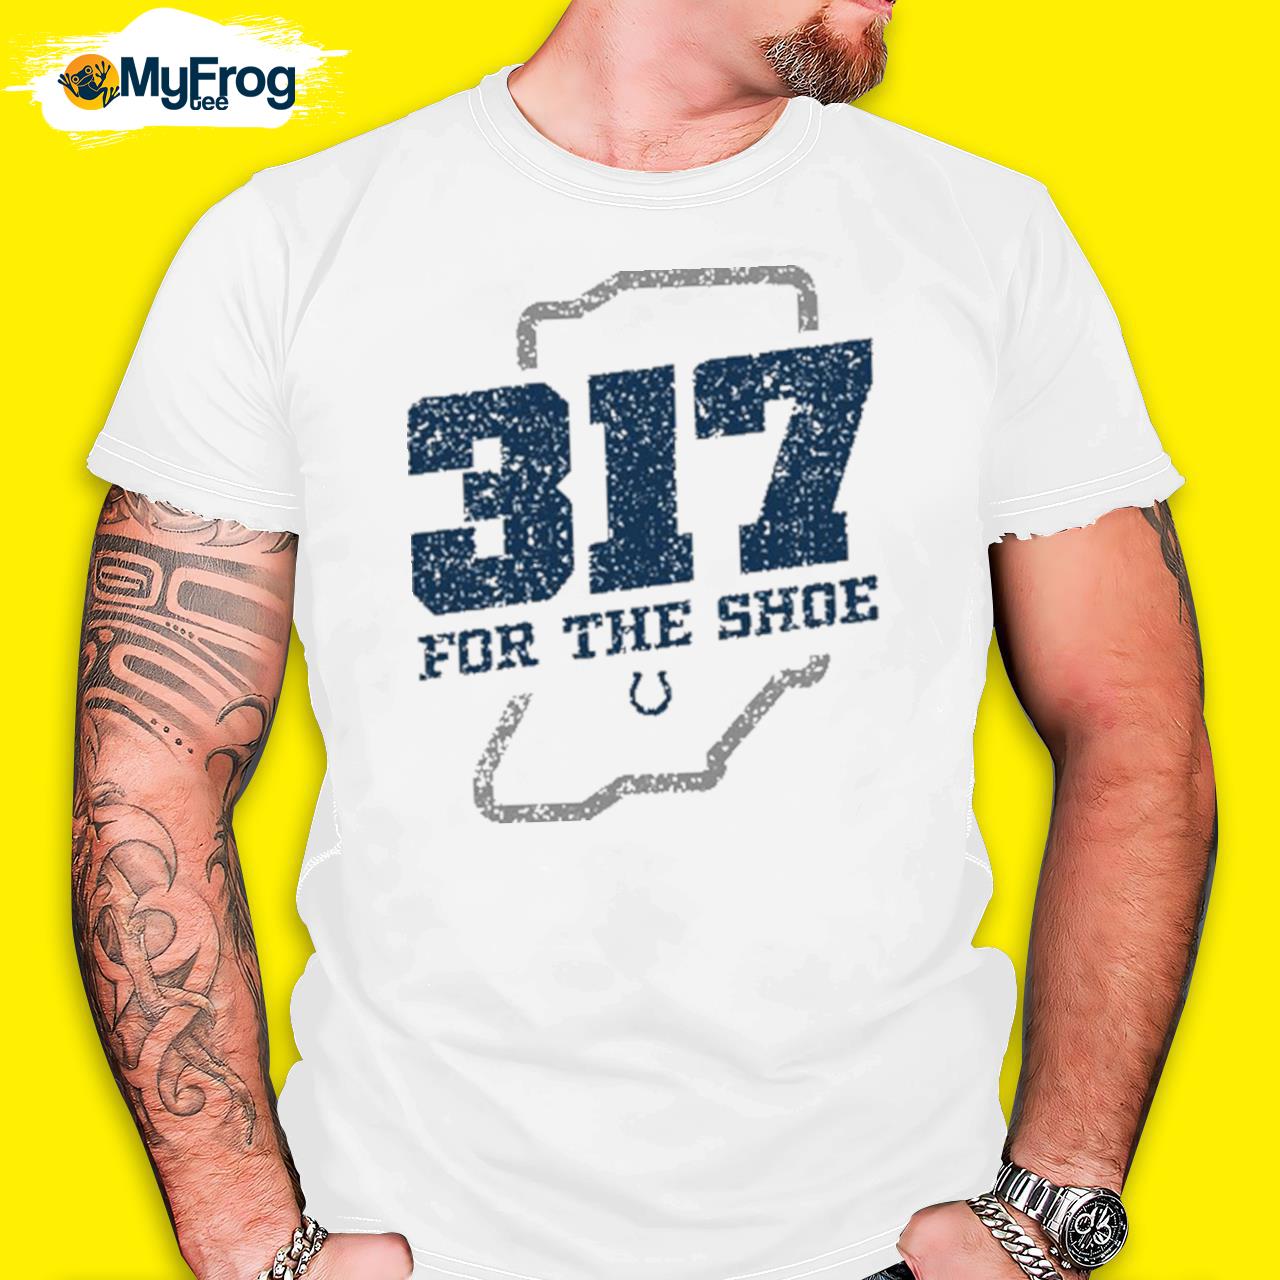 317 For The Shoe Shirt